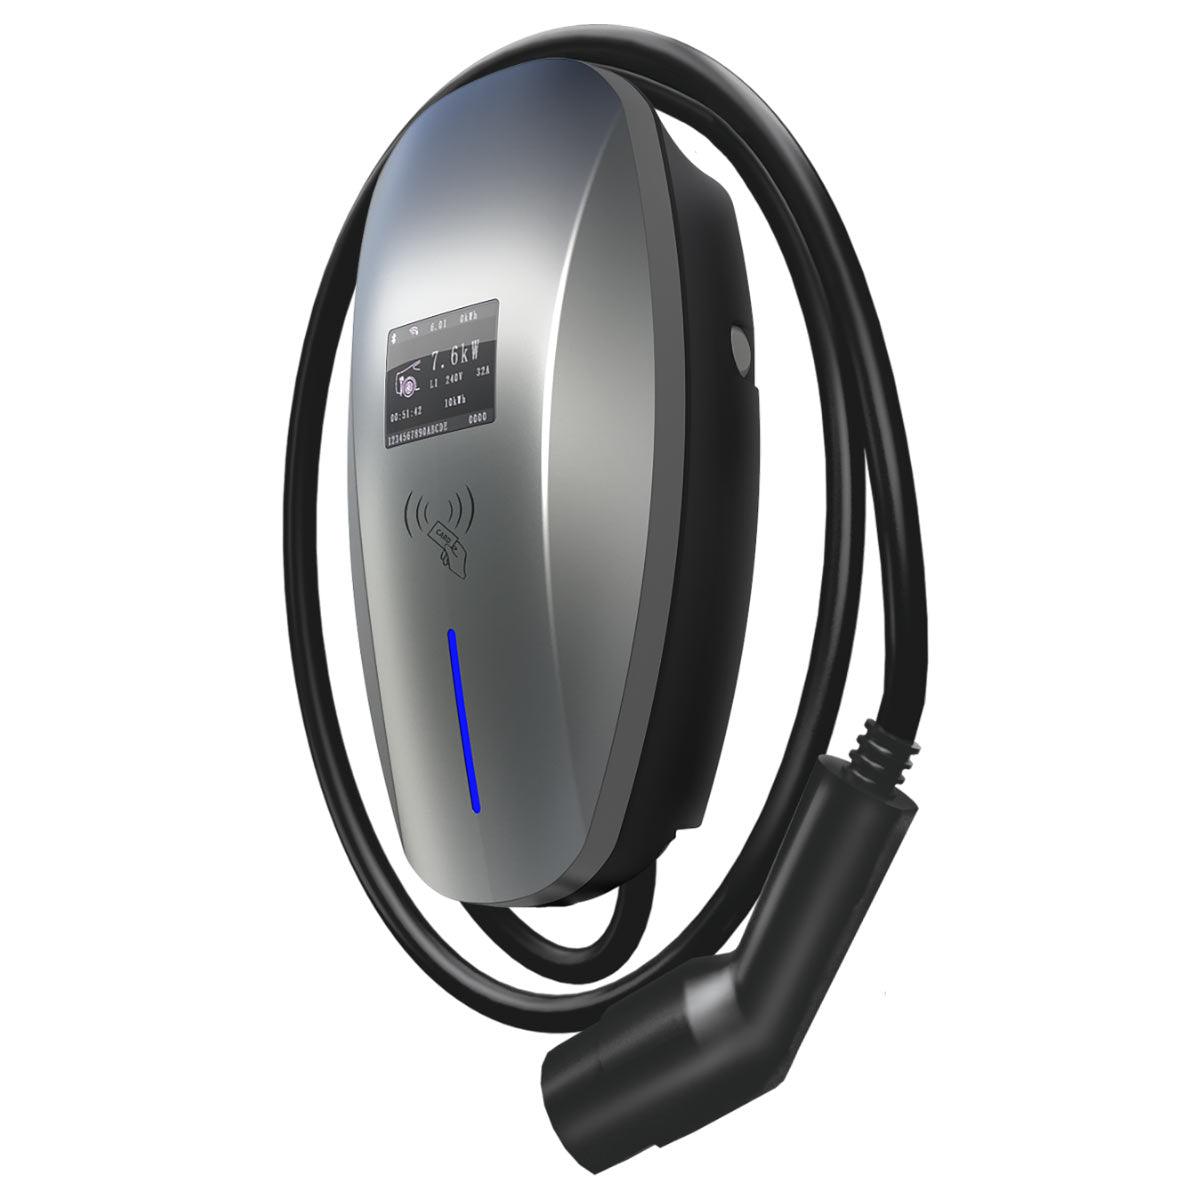 Voltacon Sparky Electric Vehicle Charger 7kW Type 2 - UK Approved - VoltaconSolar